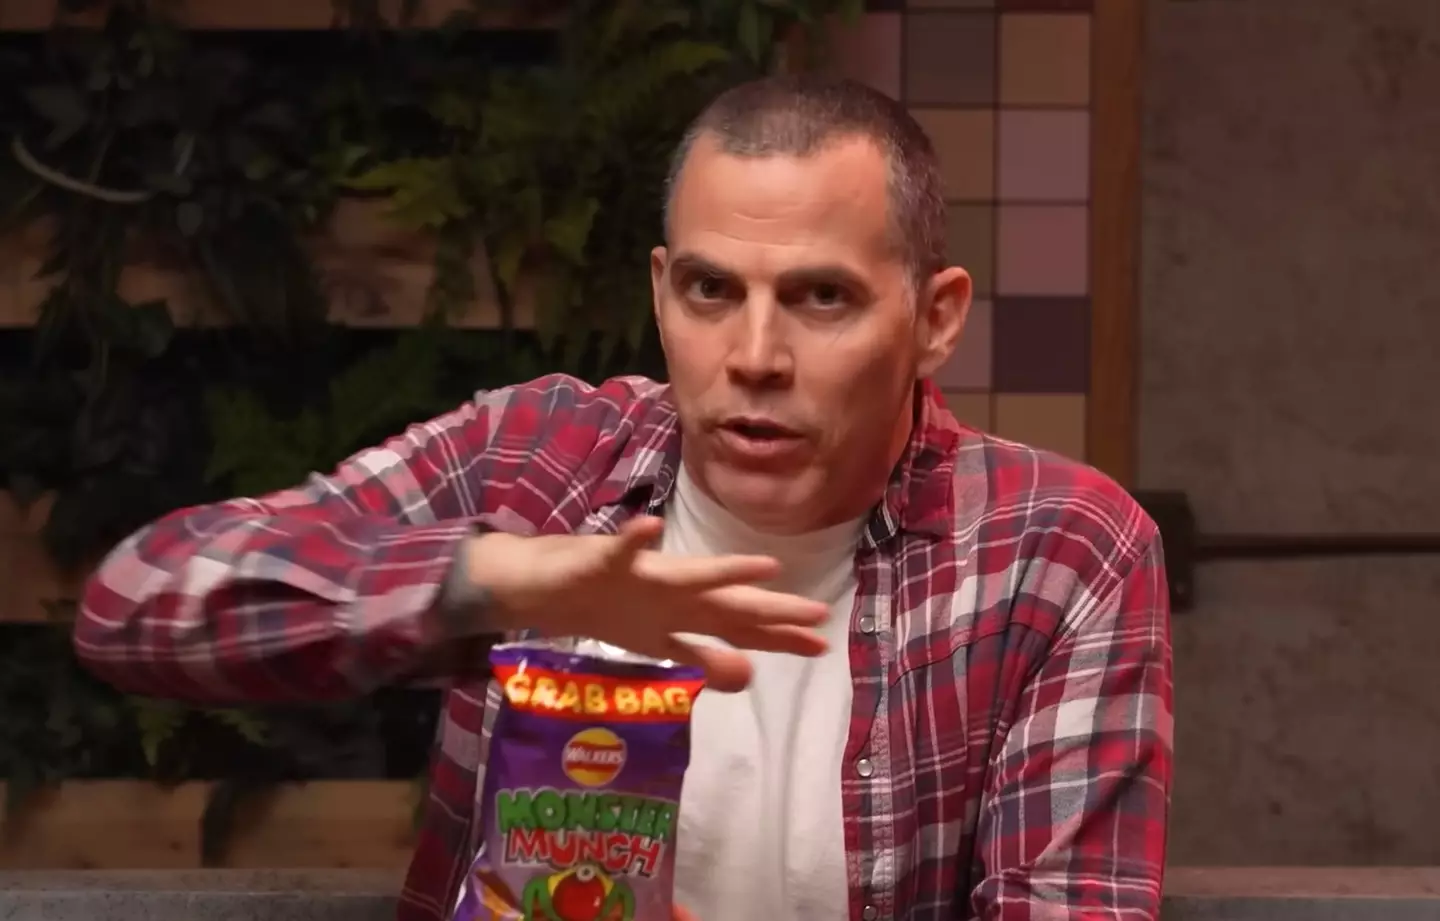 Steve-O is obsessed with the favourite British snack.